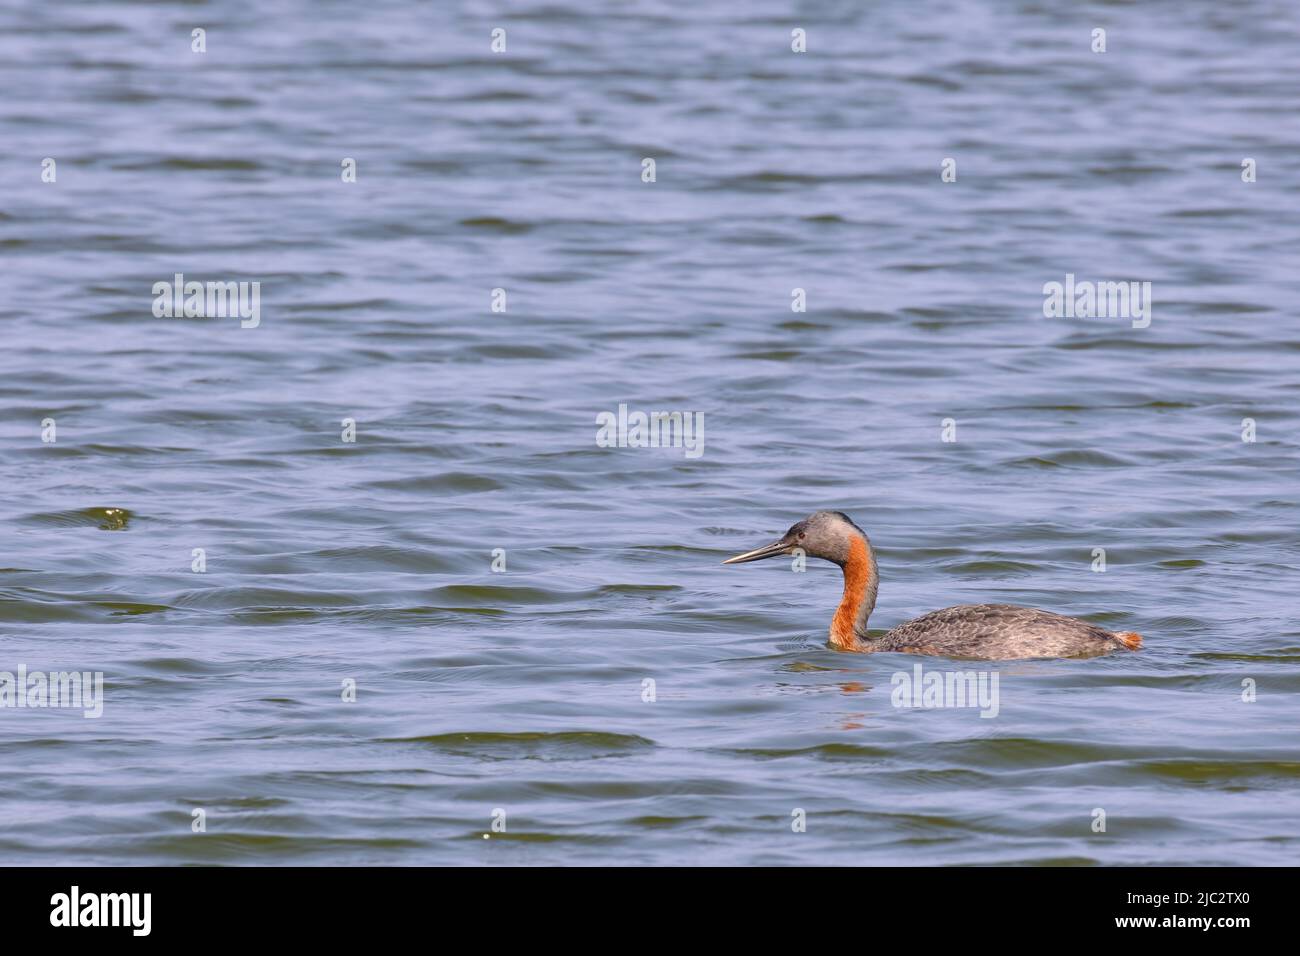 Great Grebe (Podiceps major), the largest of the grebes swimming alone in a lagoon. Stock Photo